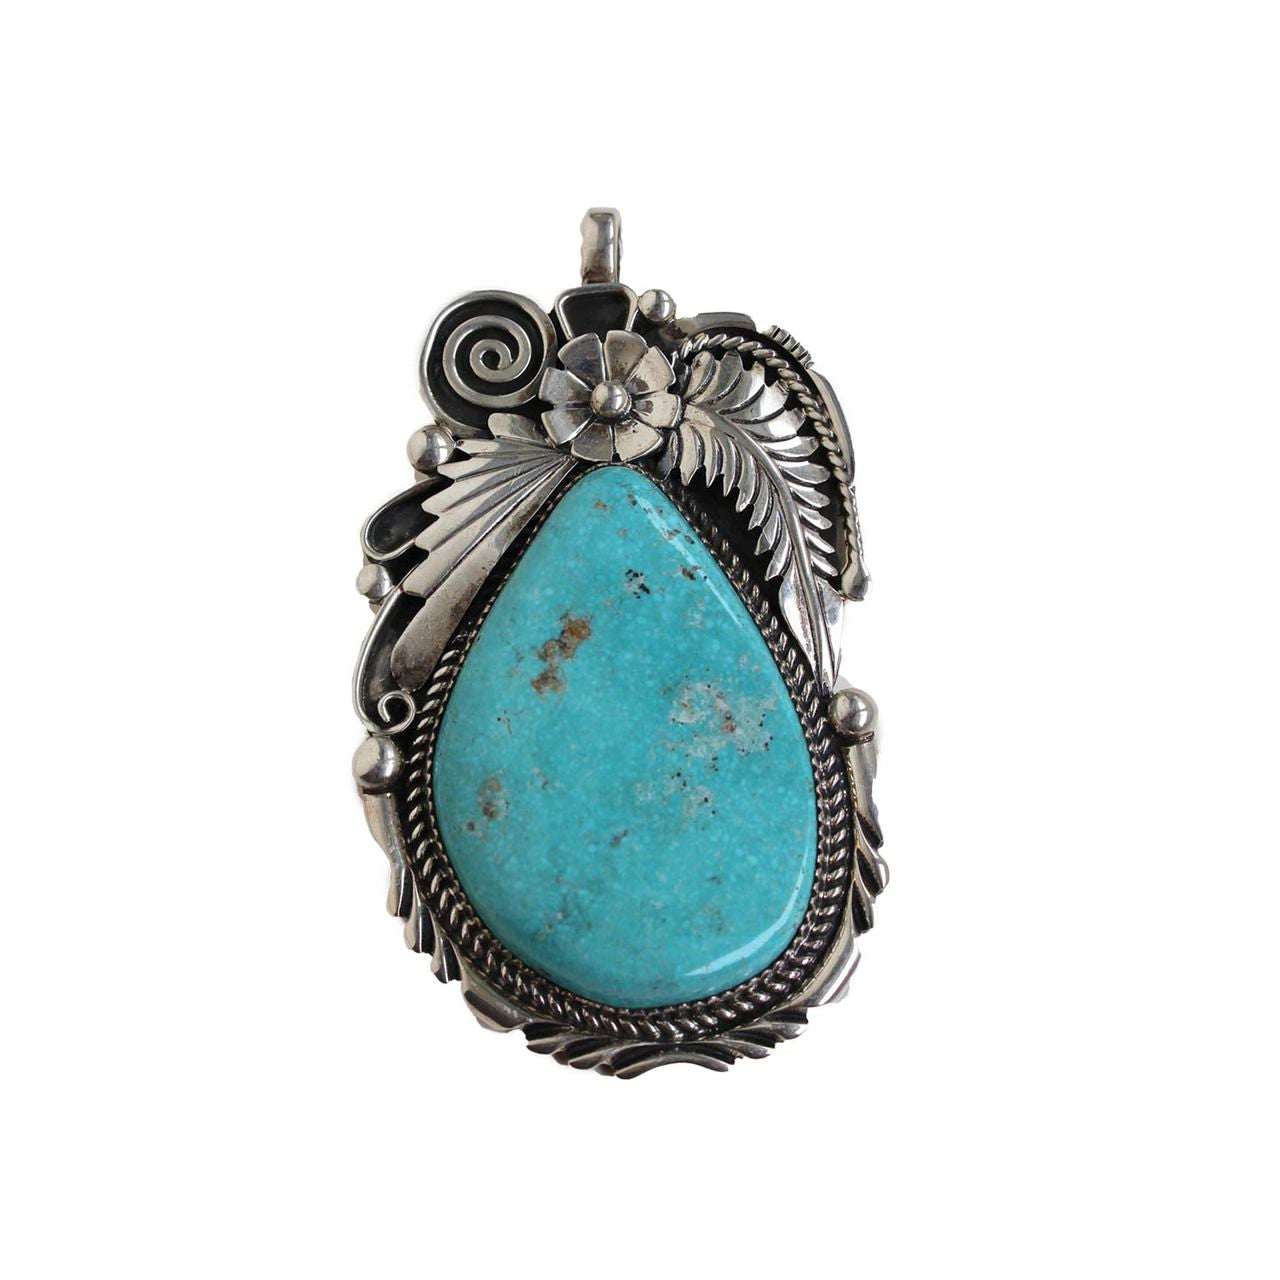 Beautiful handmade pendant in a tear drop shape.  Hand picked turquoise in a silver floral setting.  